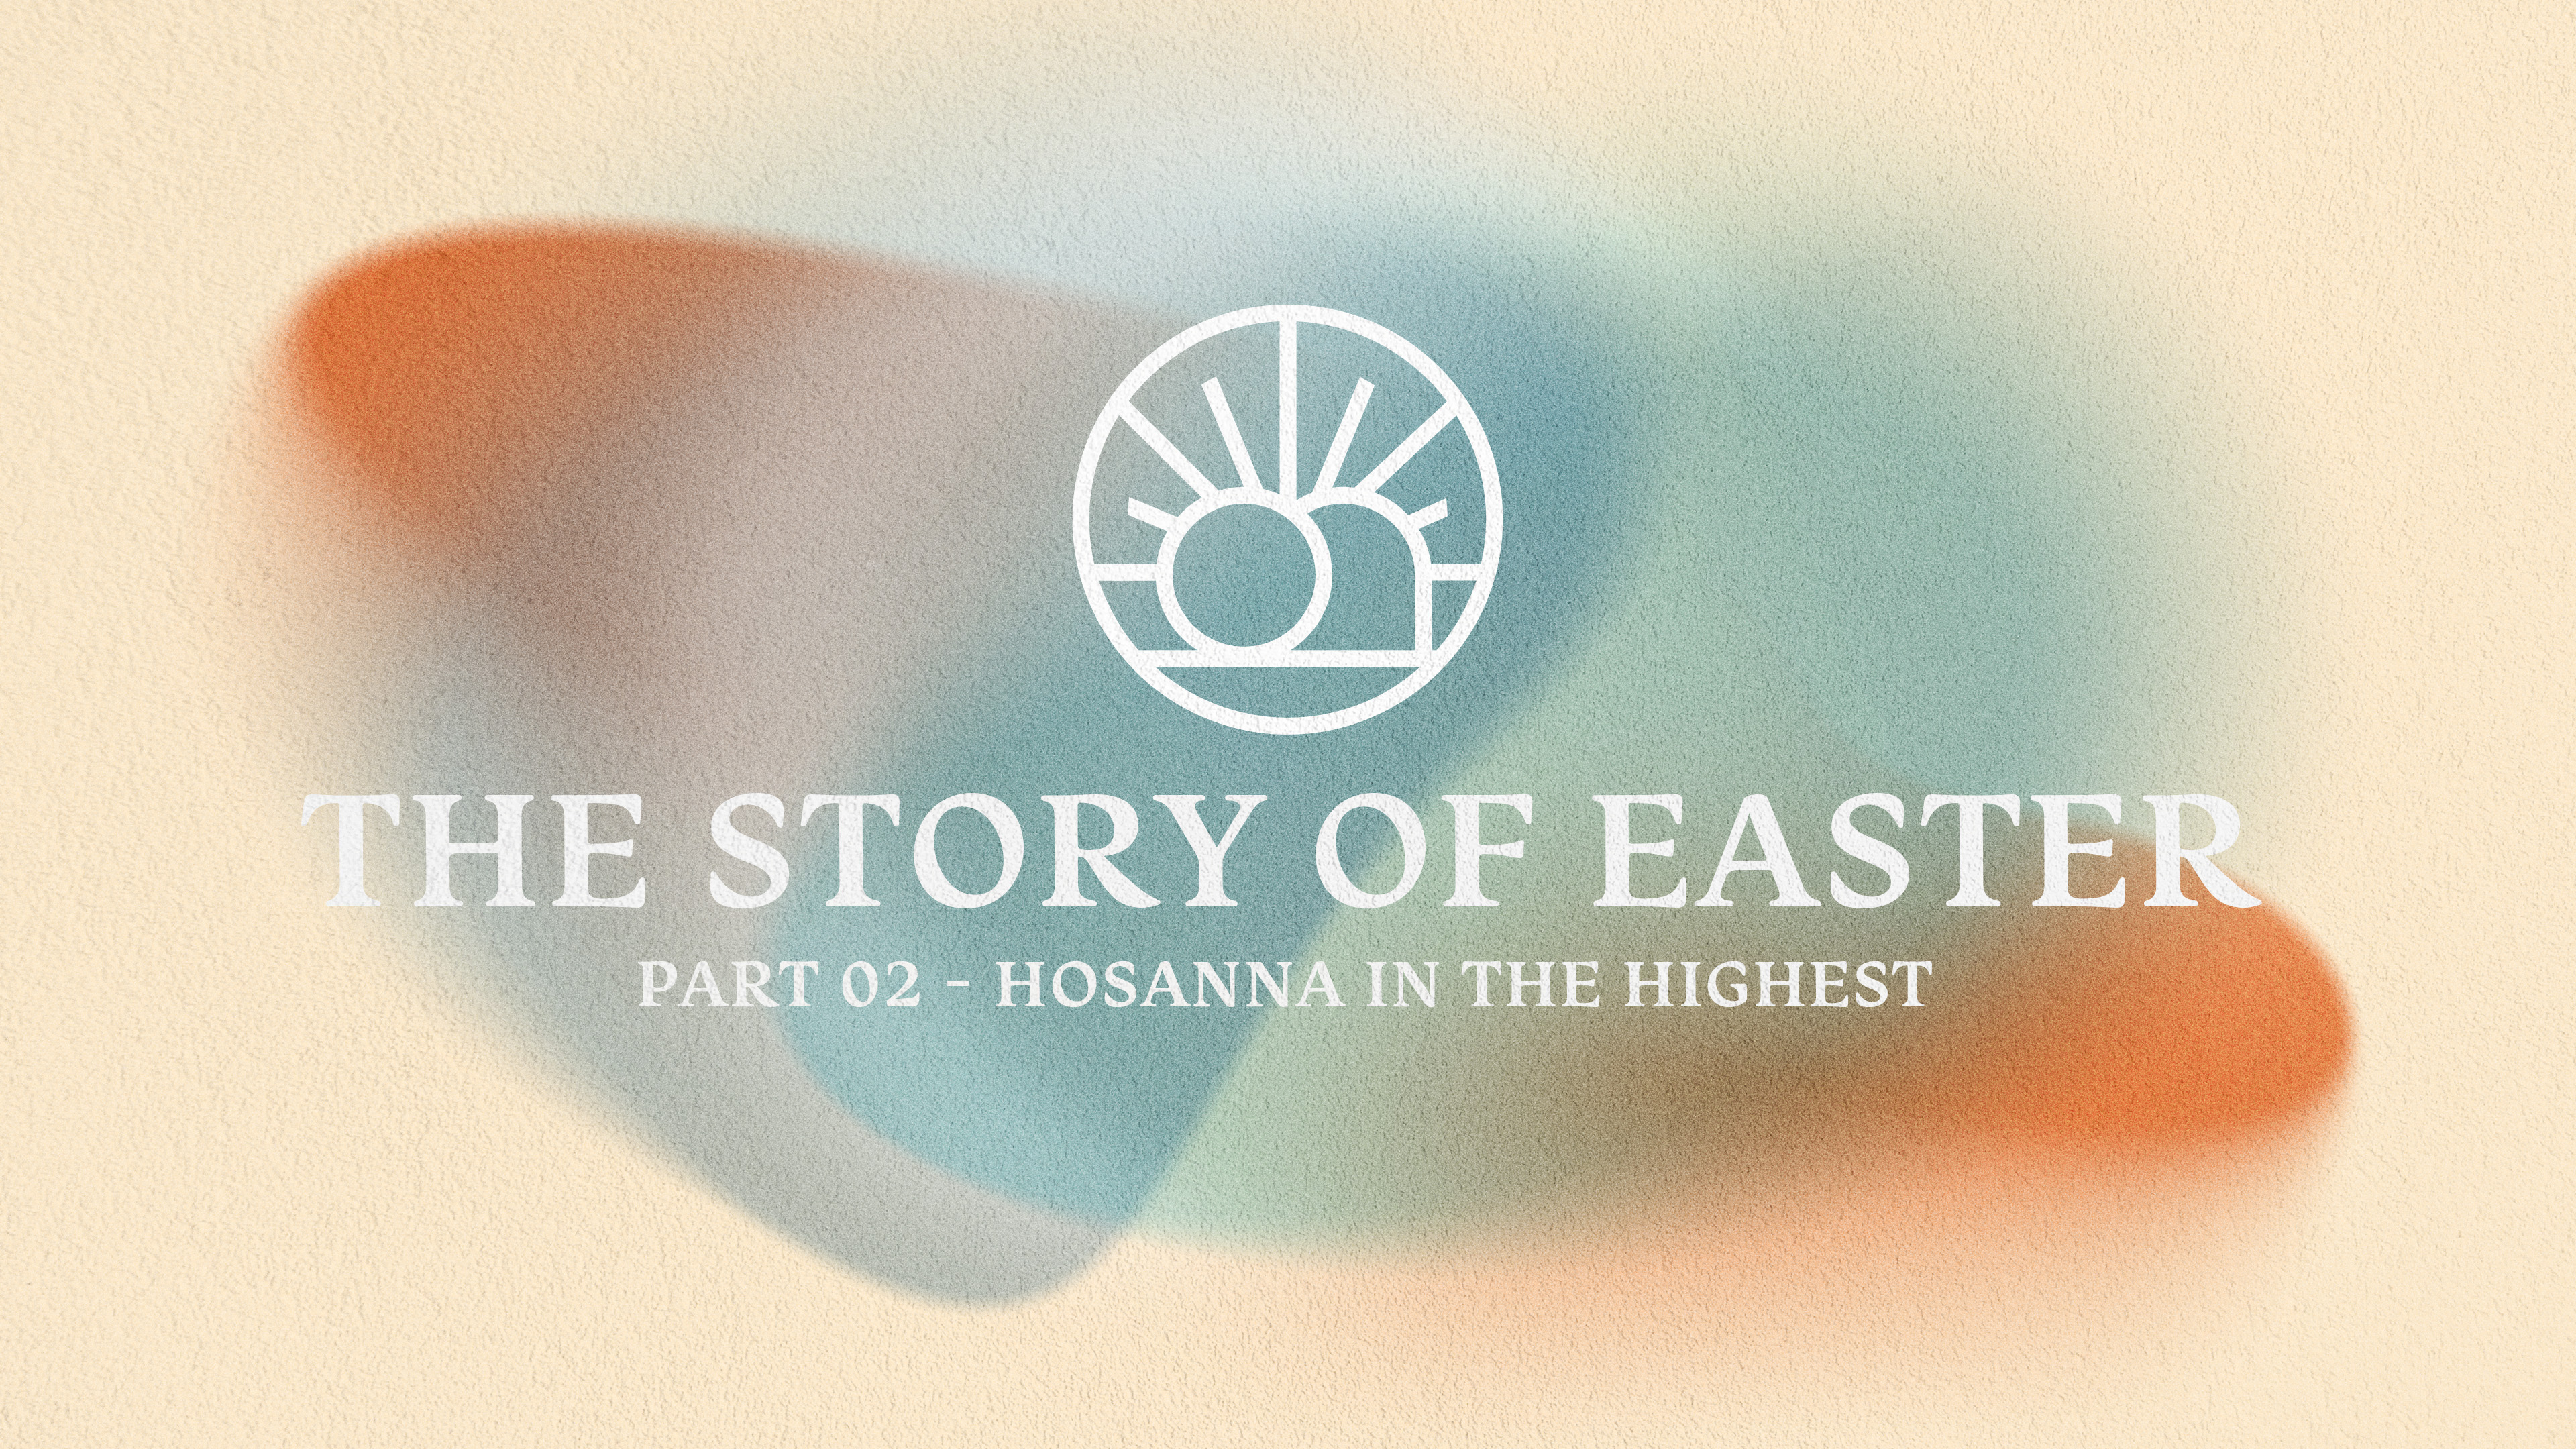 The Story of Easter Part 02